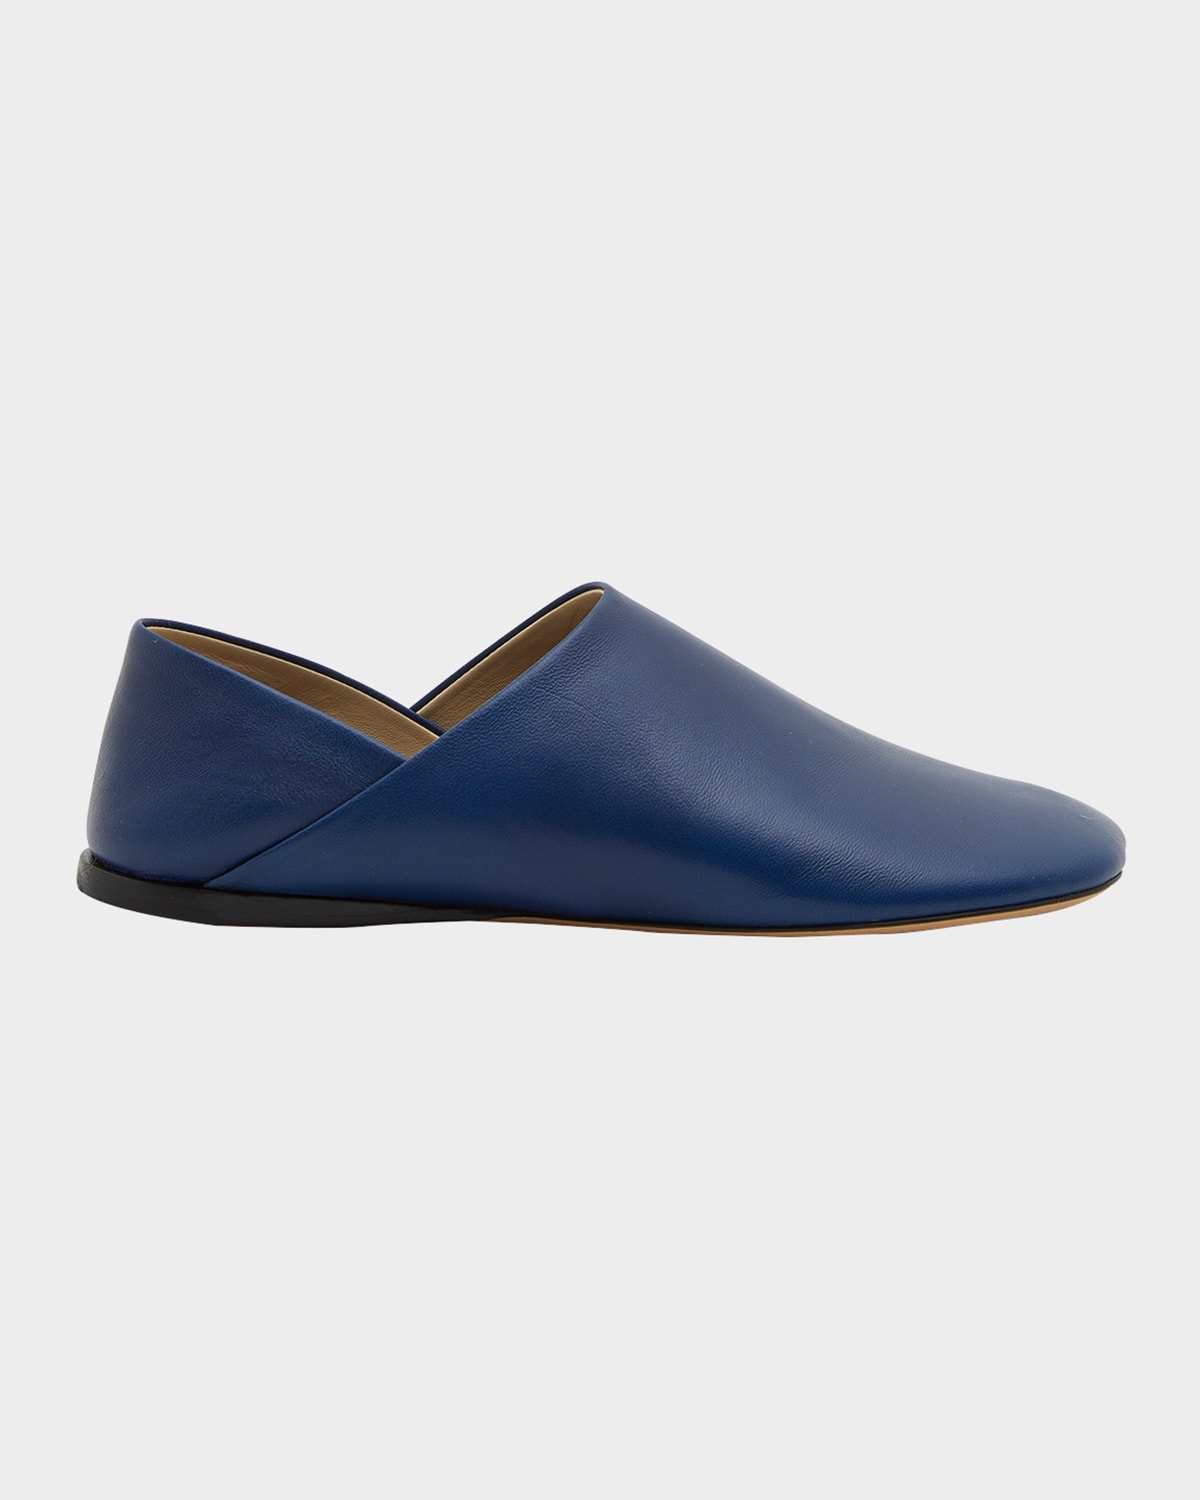 Loewe Toy Leather Slipper Loafers In Raw Denim